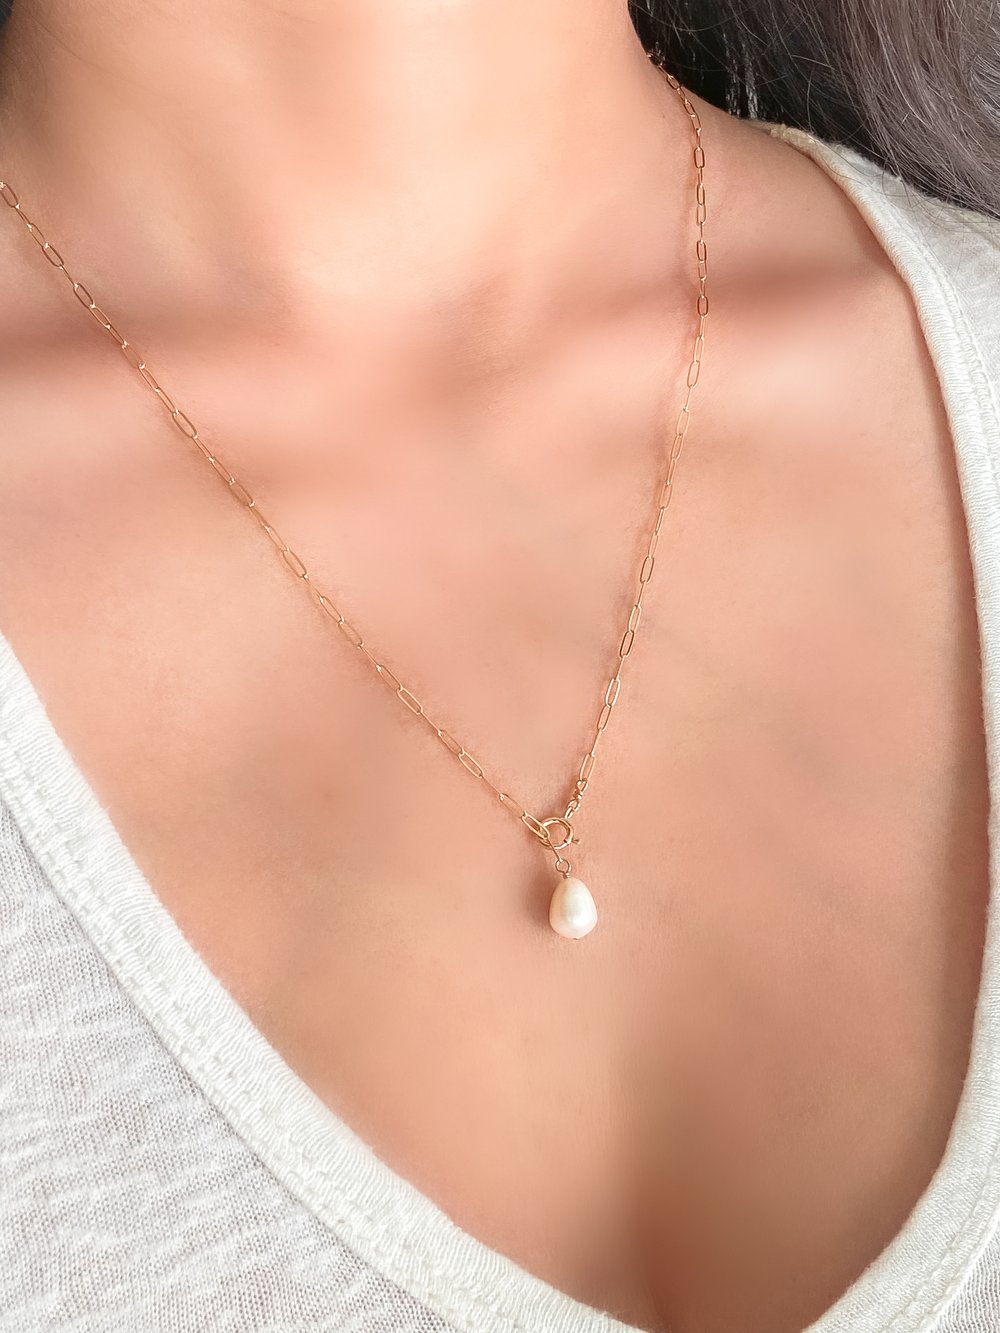 Dainty Pearl Necklace, Gold Fill Chain, Freshwater Pearl, Delicate